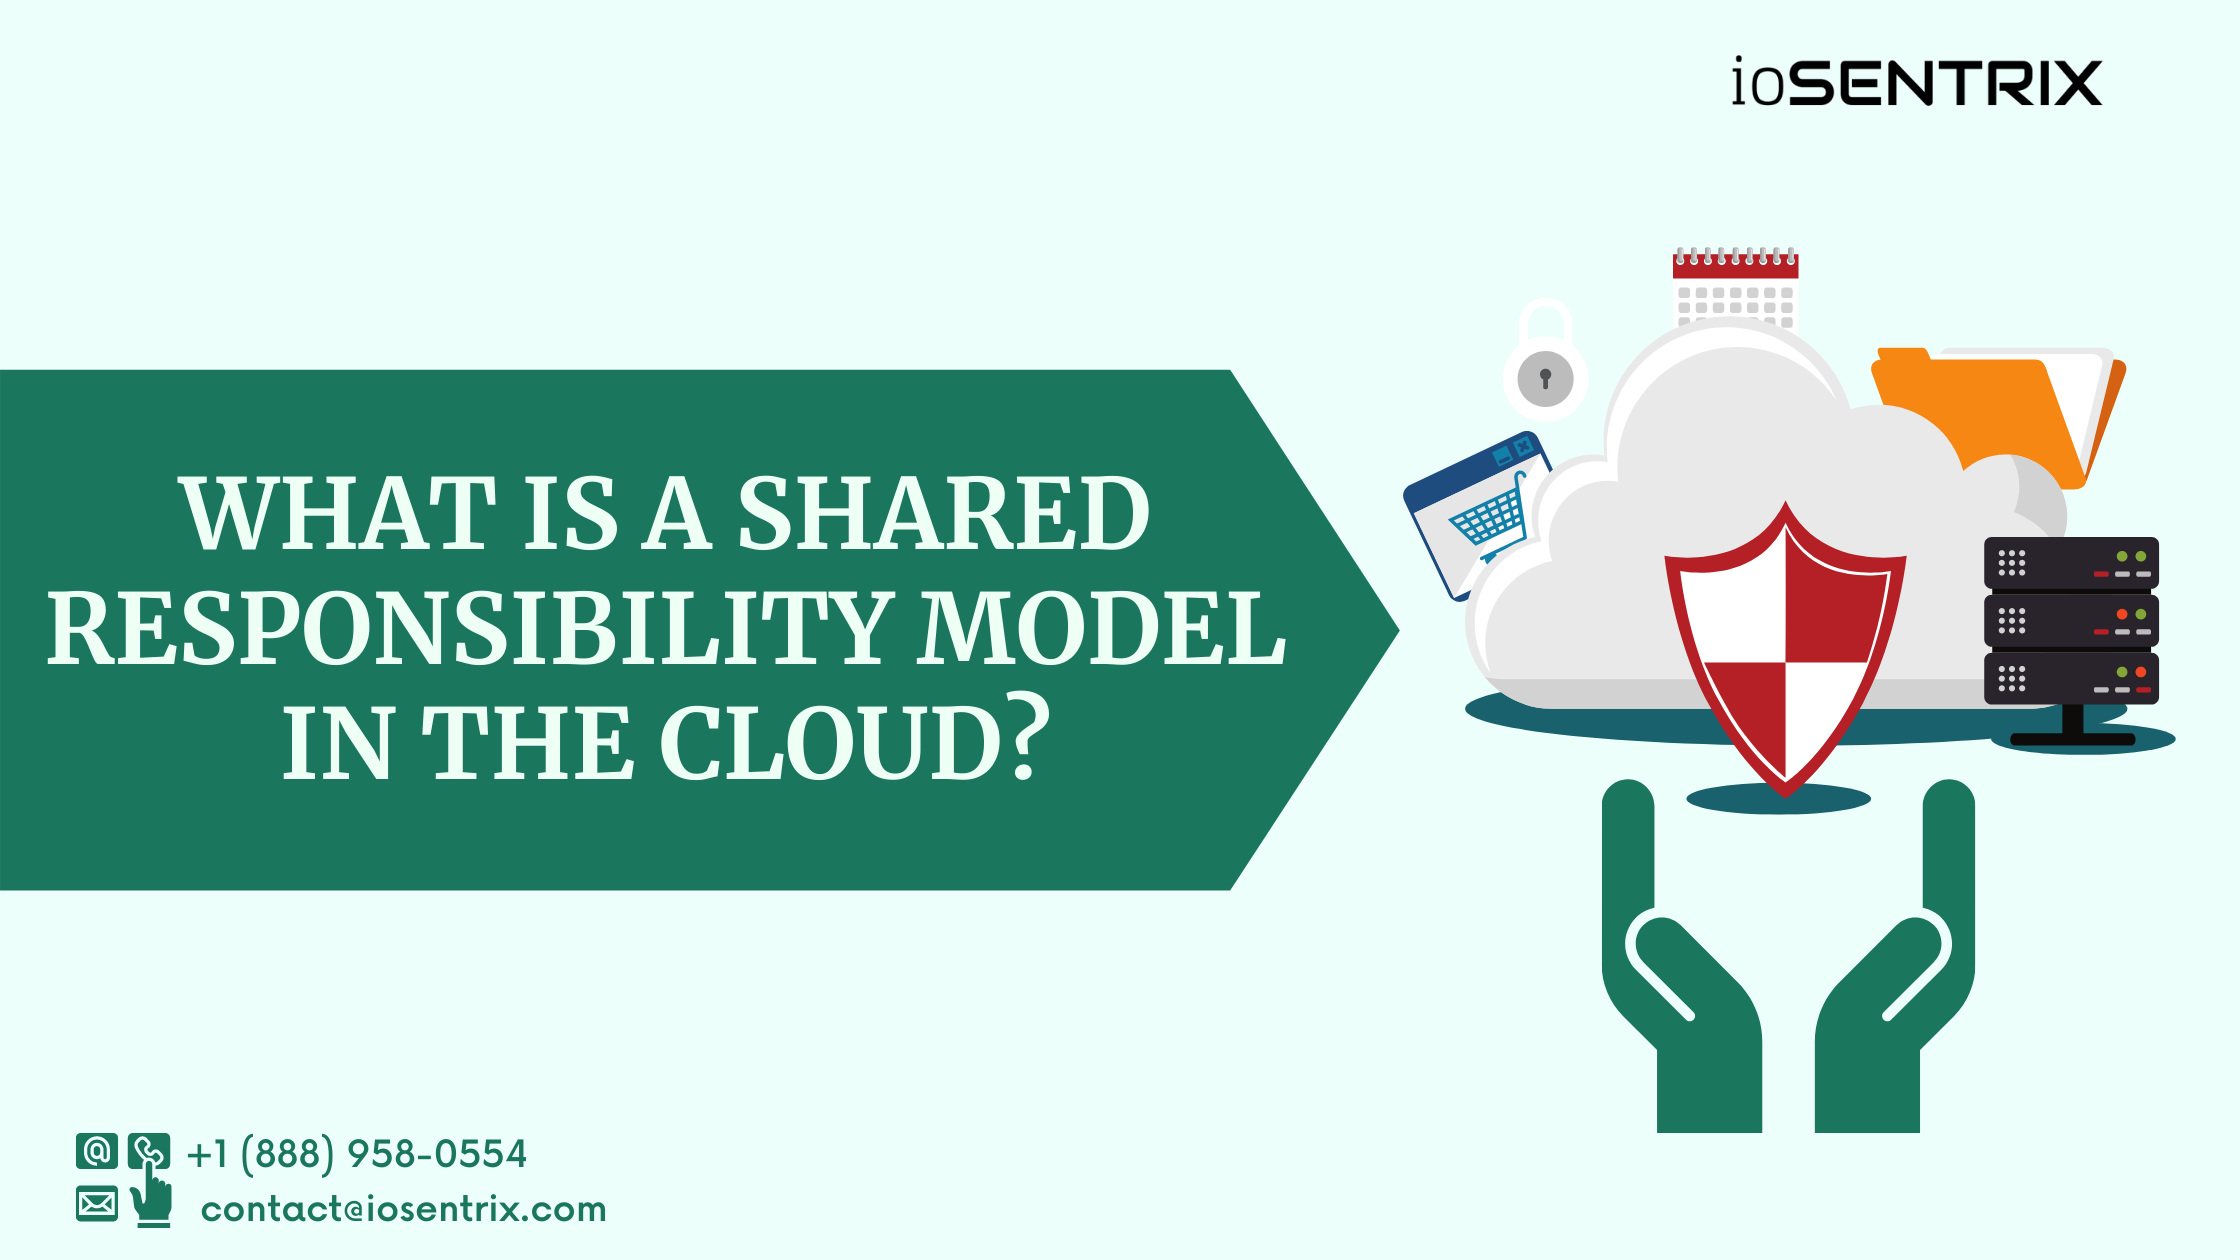 What is a shared responsibility model in the cloud?